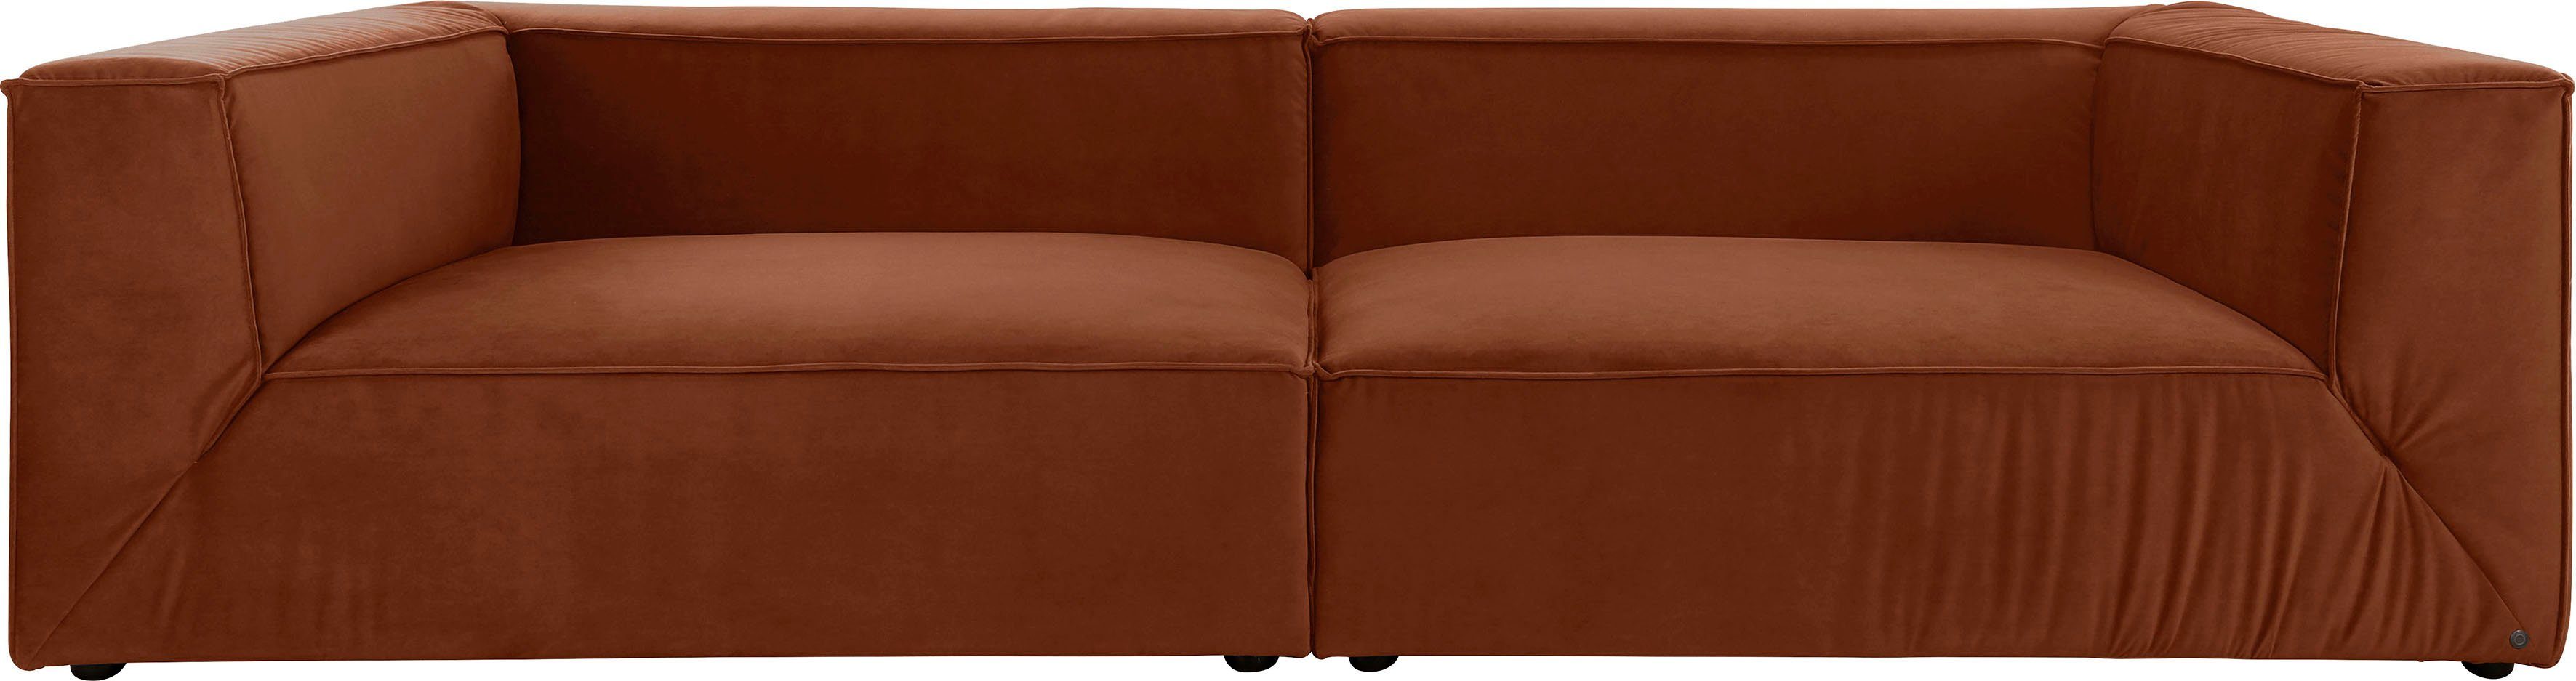 122 Tiefe in TOM BIG TOM HOME CUBE<<, Big-Sofa TAILOR >>BIG CUBE, Big-Sofa 3 cm TAILOR Breiten,